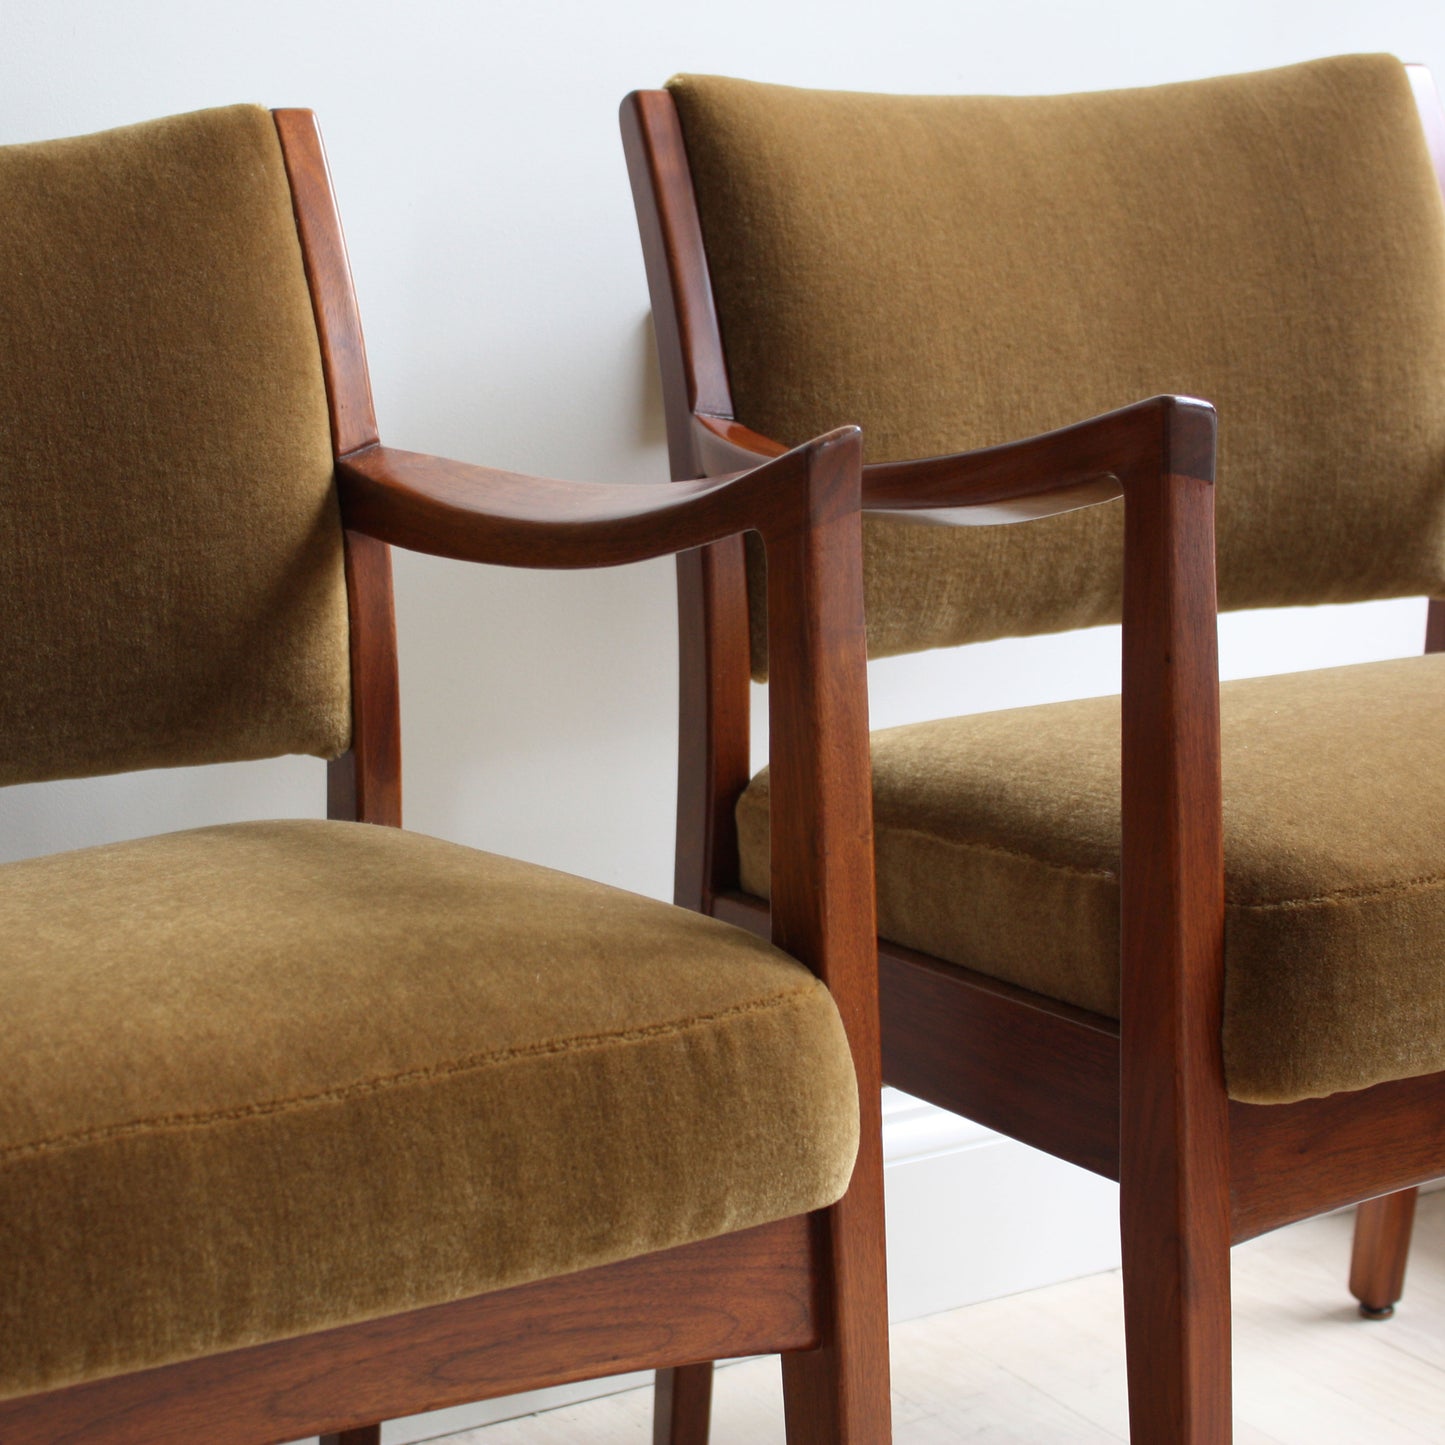 Wood-Framed Modern Arm Chairs - Set of 2